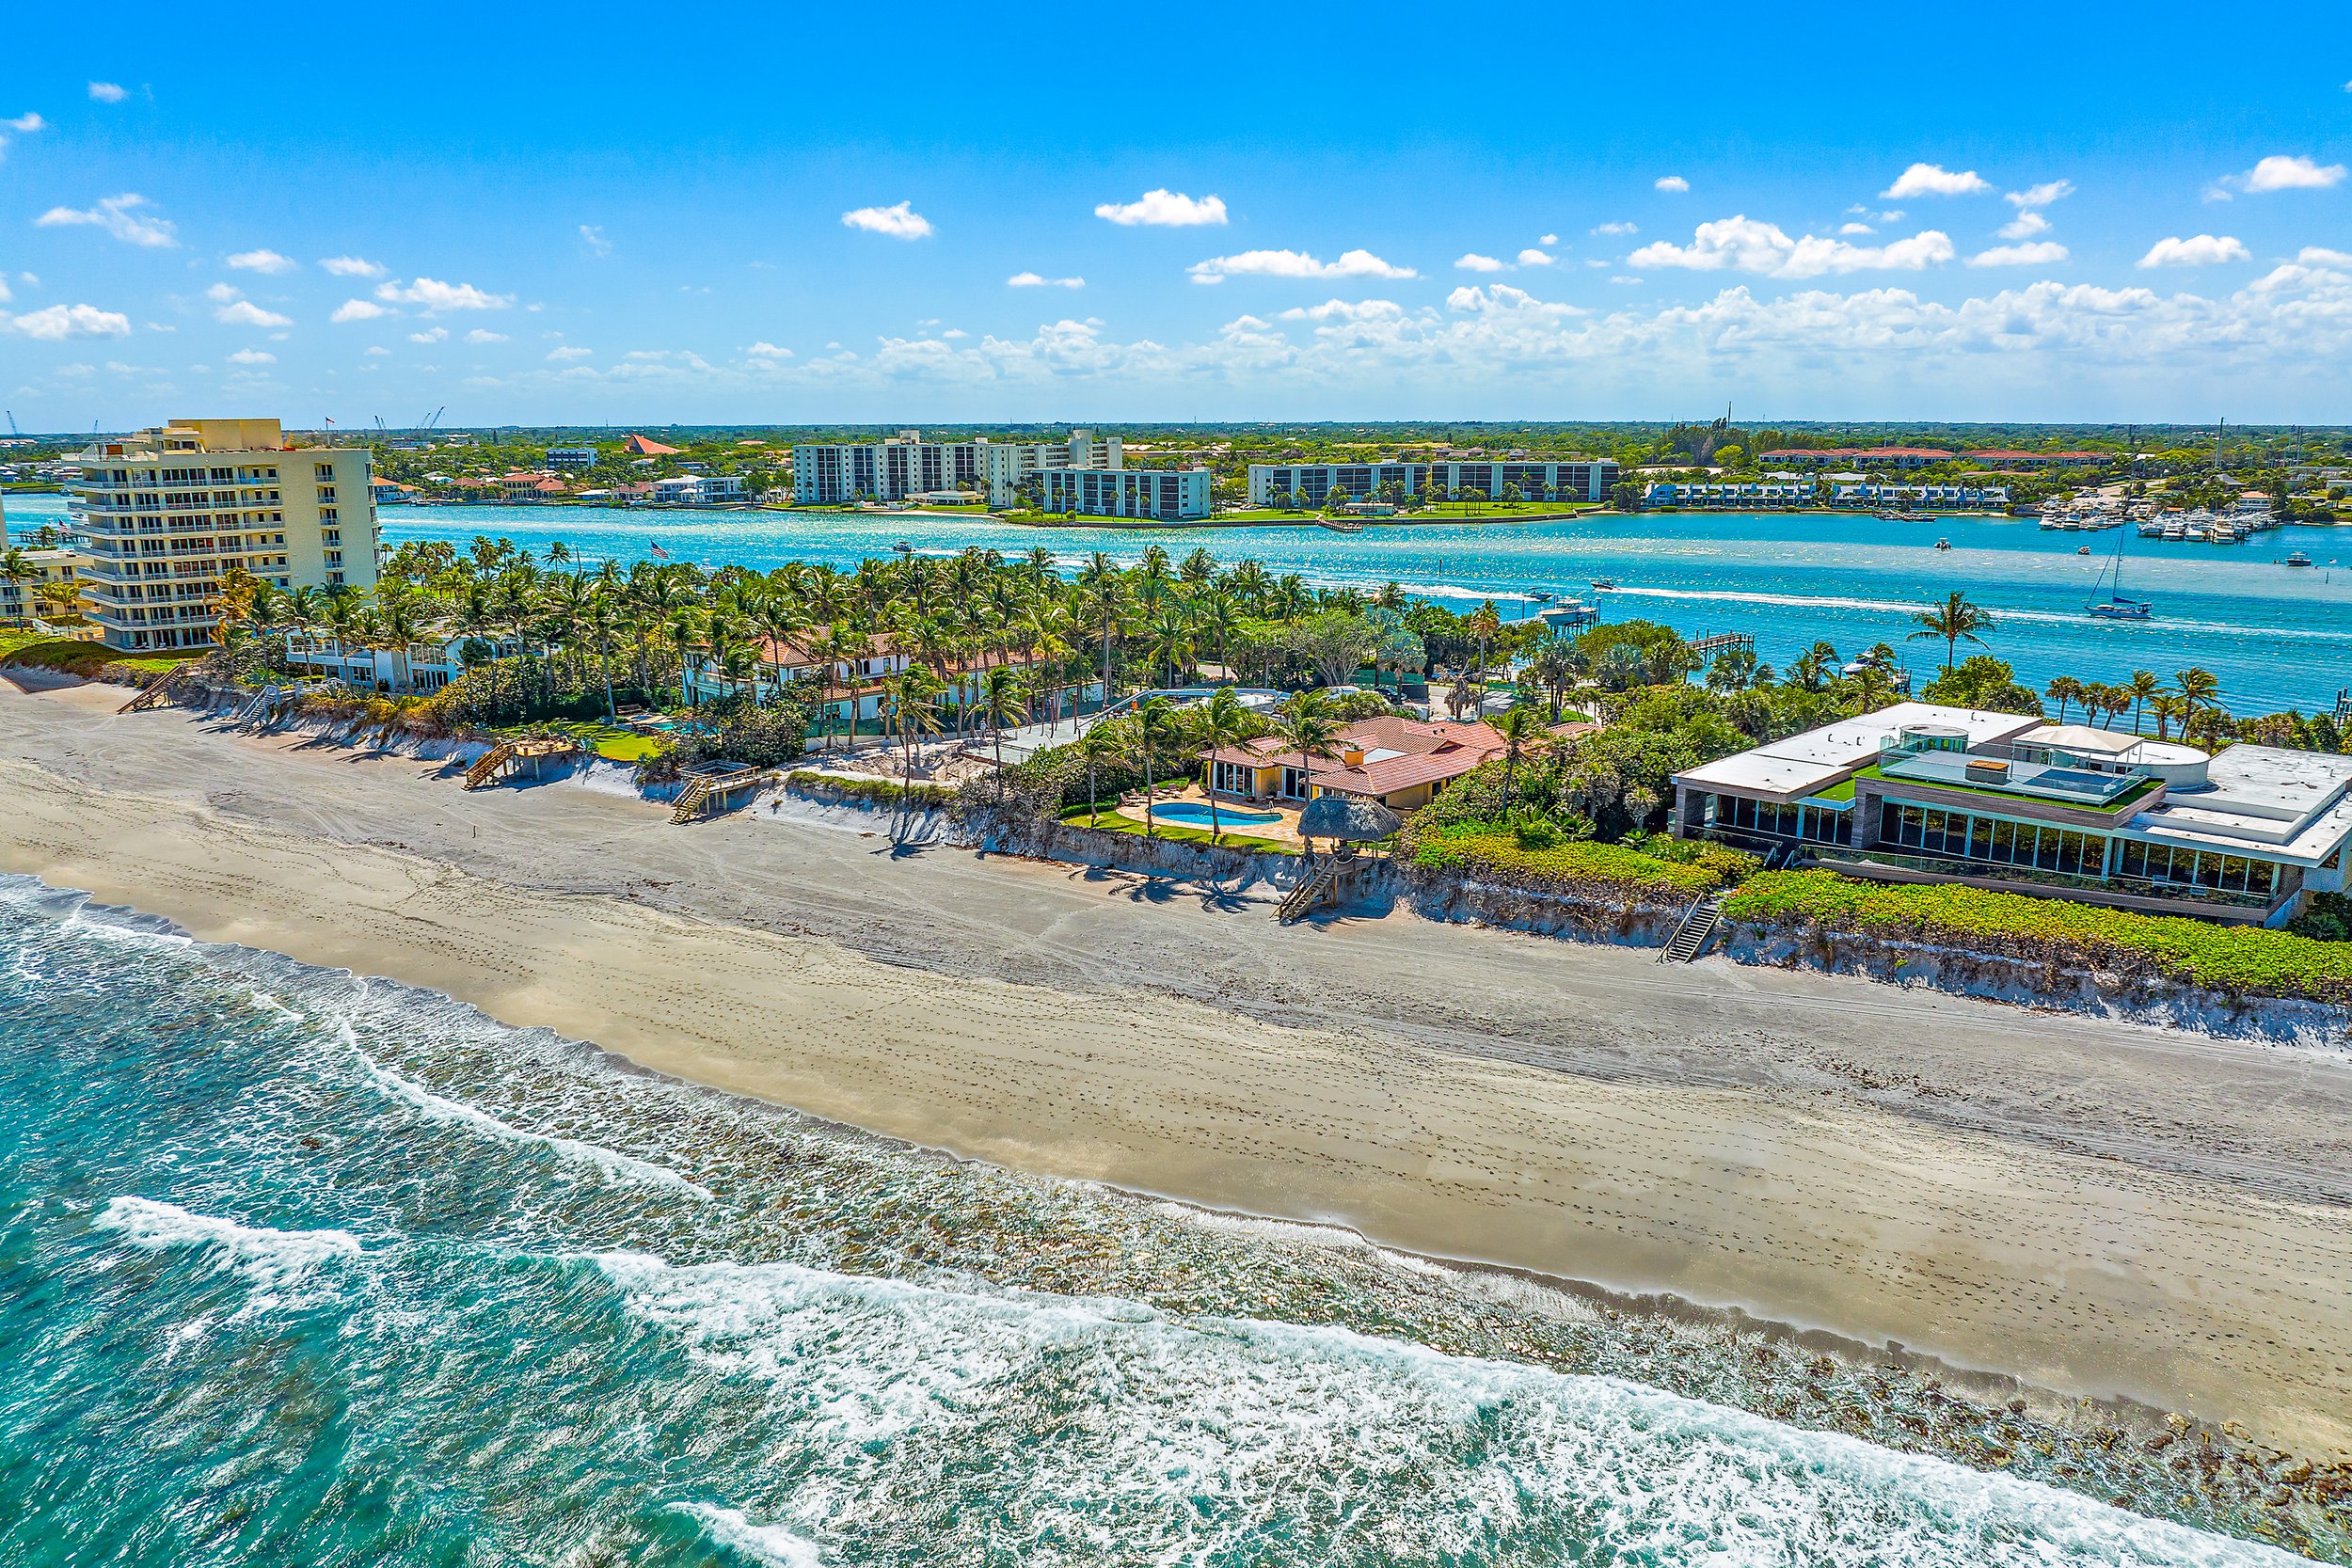 Tour A Jupiter Beachfront Mansion Owned By Clyde R. %22Buzz%22 Gibb Which Is Asking $24.9 Million 132.jpg